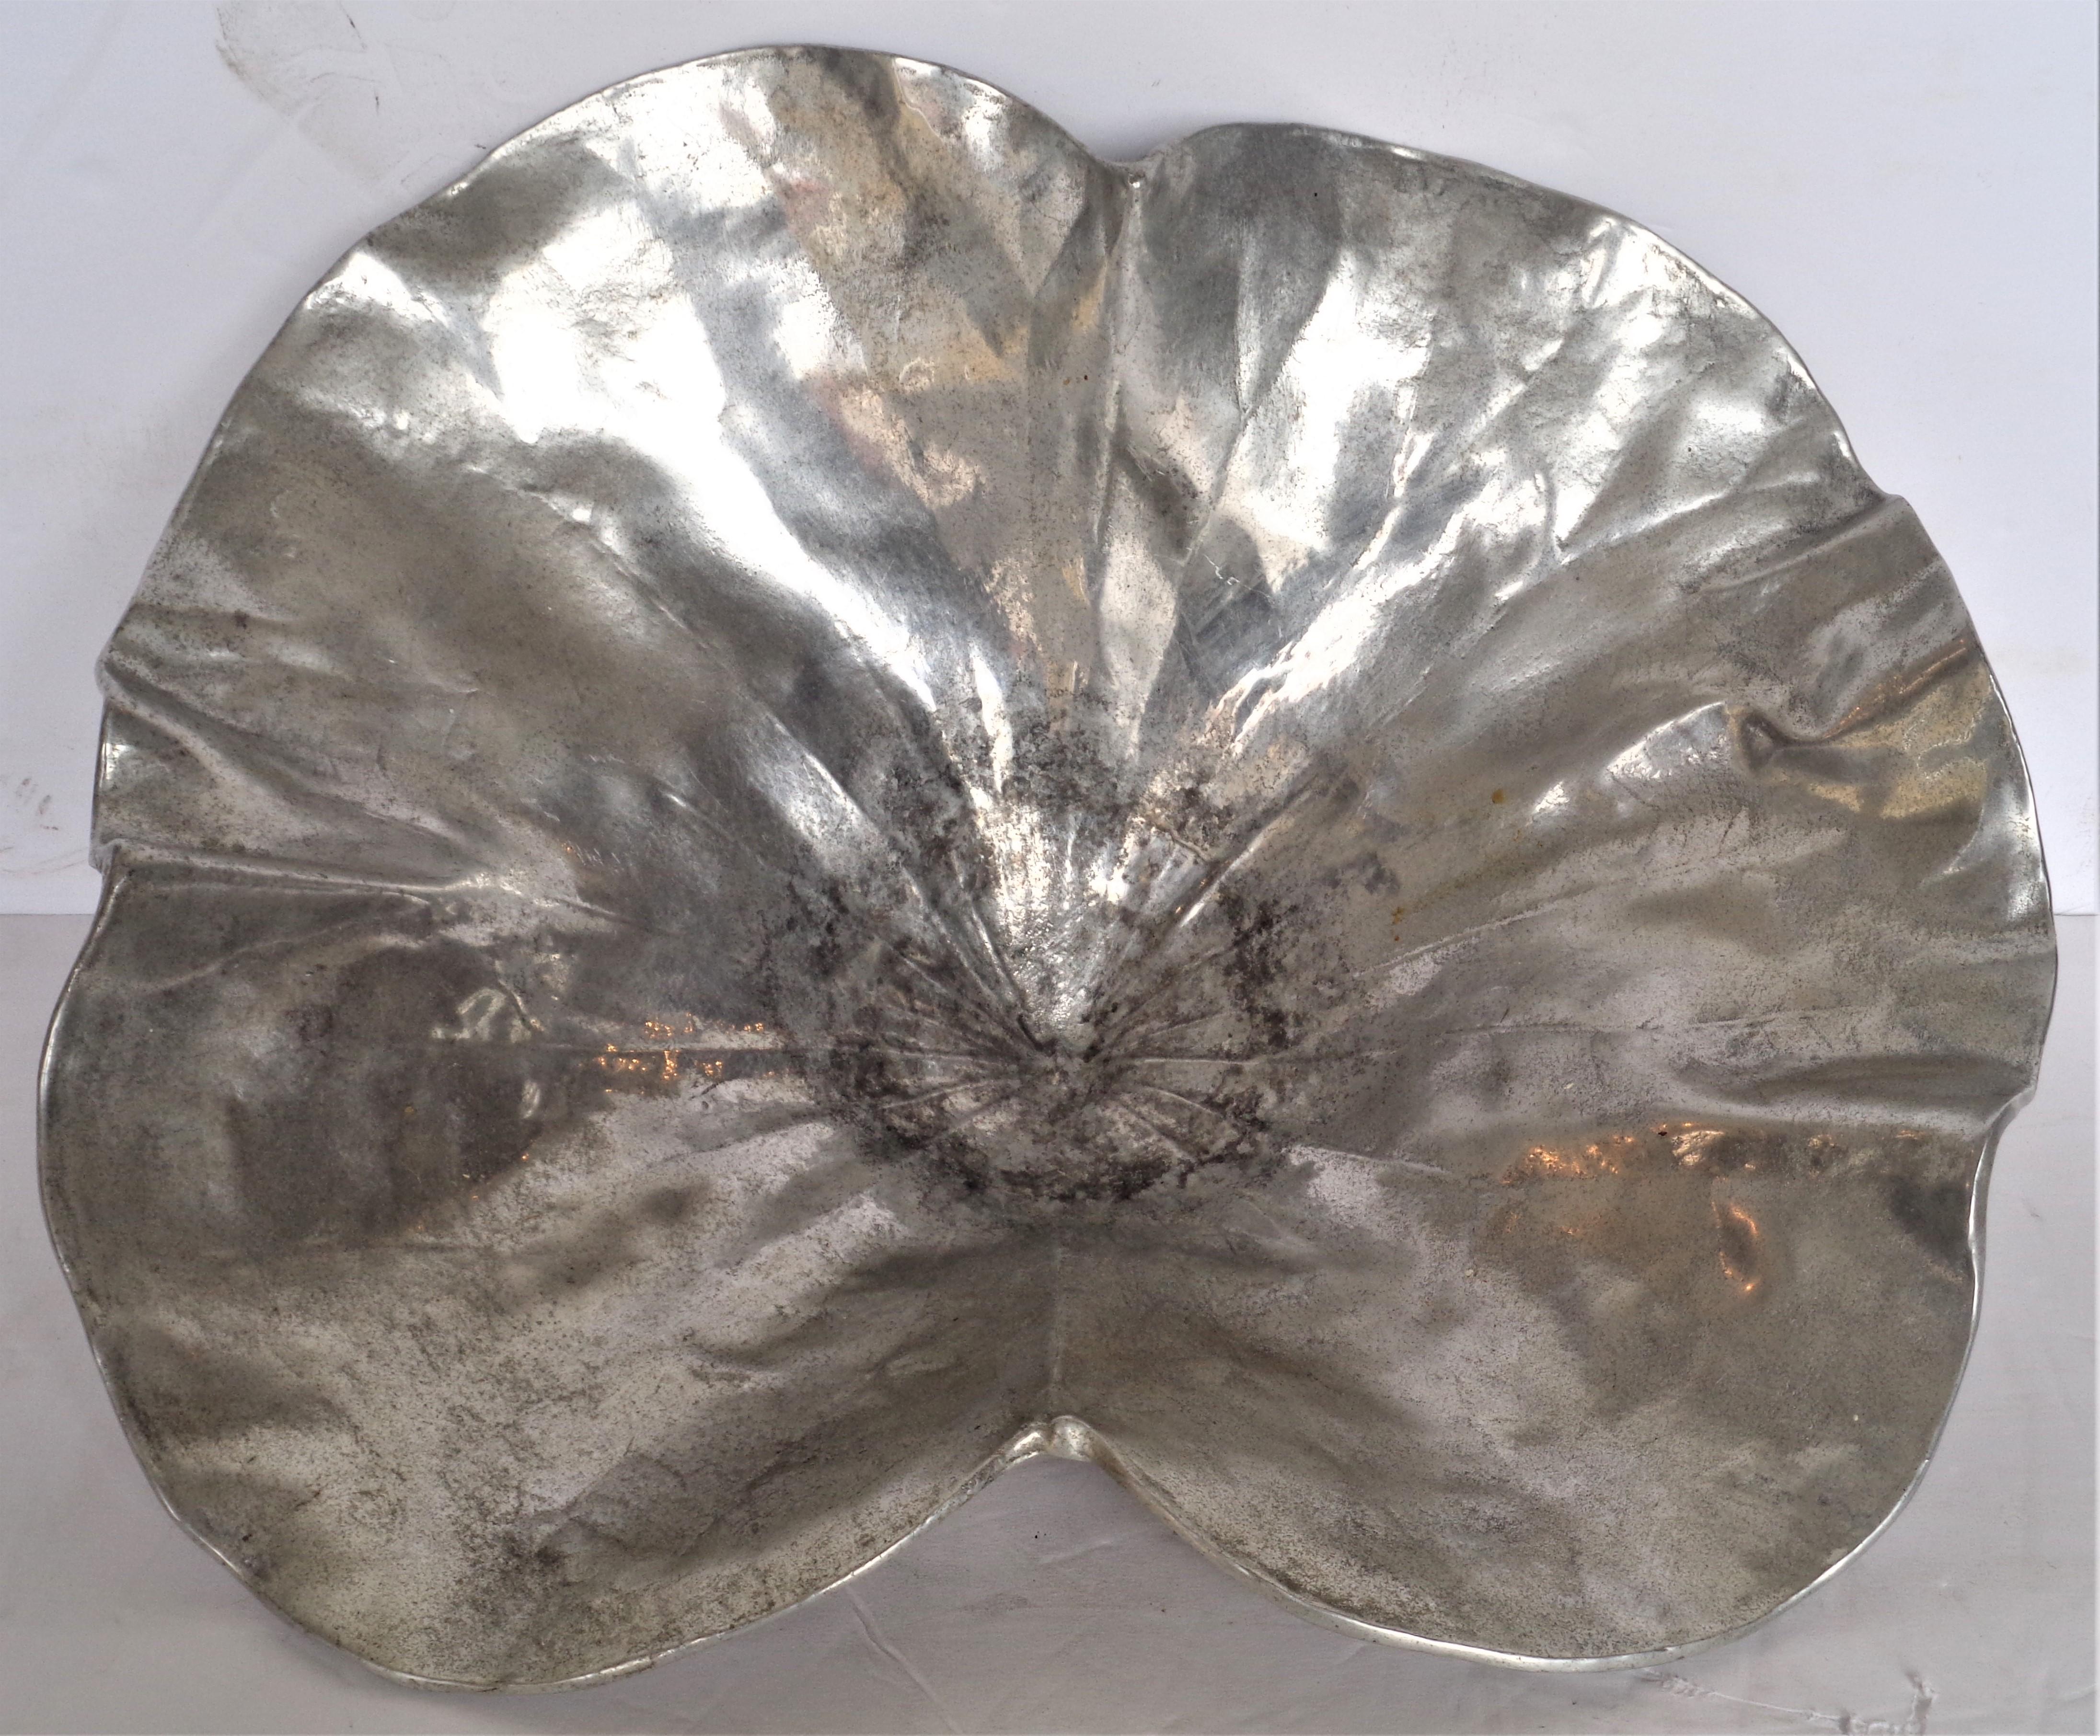 Cast aluminum lotus leaf bowl by Oskar Hansen for Harvin Company. Nicely aged original surface color with some oxidation. Stamped on underside - Lotus Large 3514 Harvin and some other writing that has worn off. Circa 1940's. Look at all pictures and